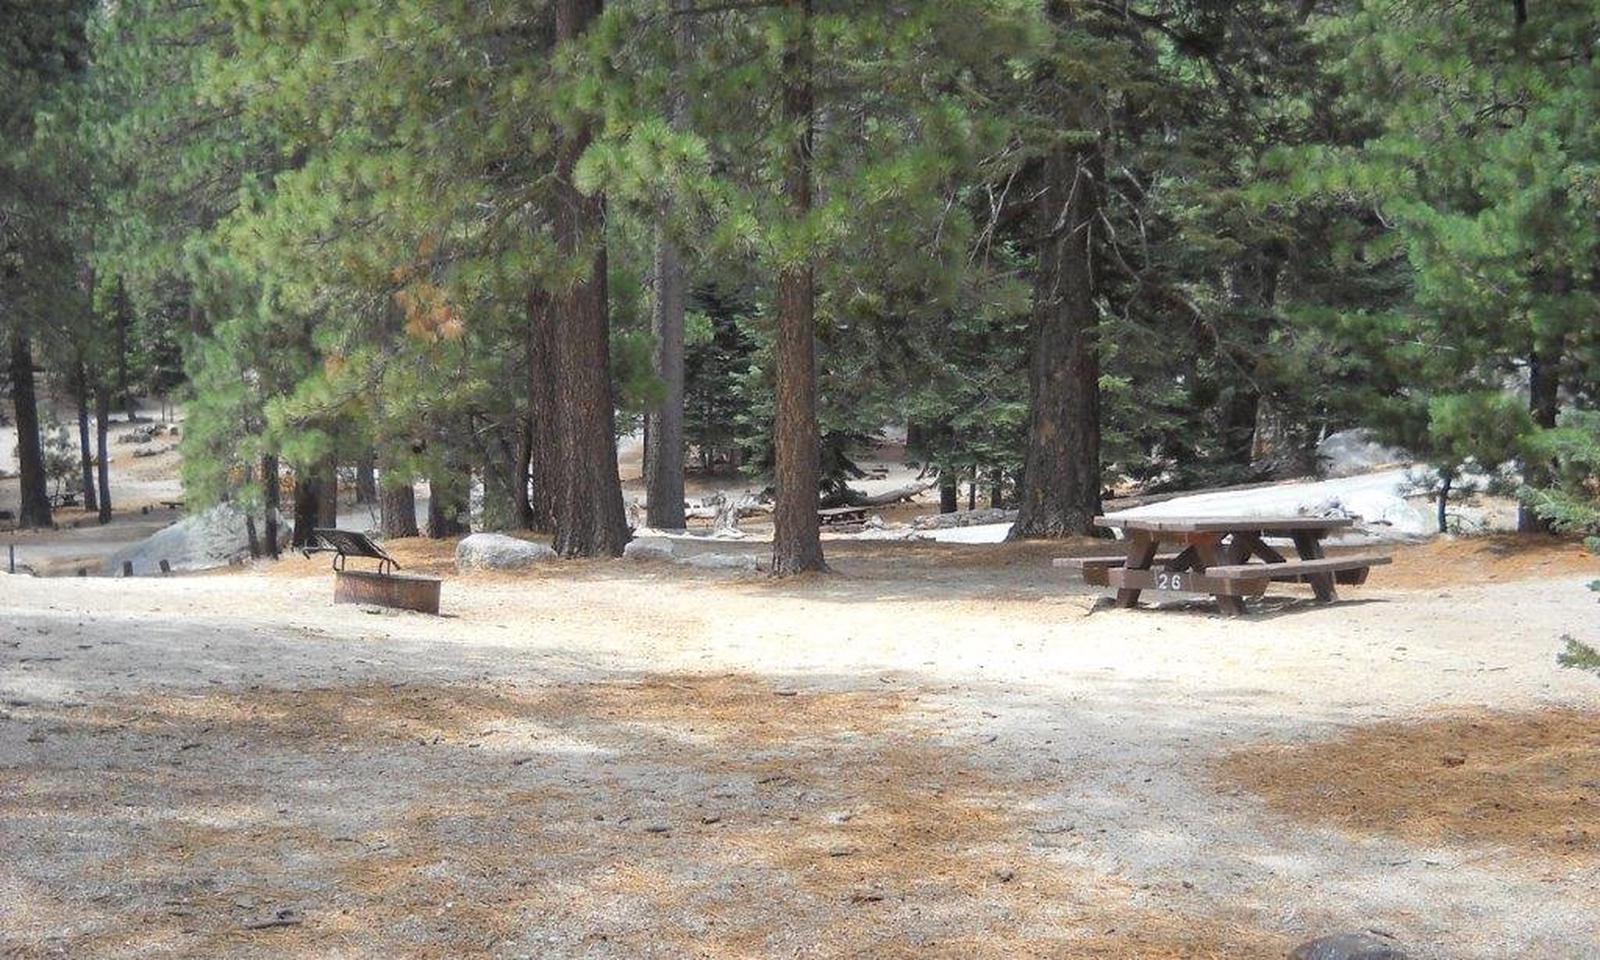 Boulder Basin campsite 26 with picnic table and fire pit.